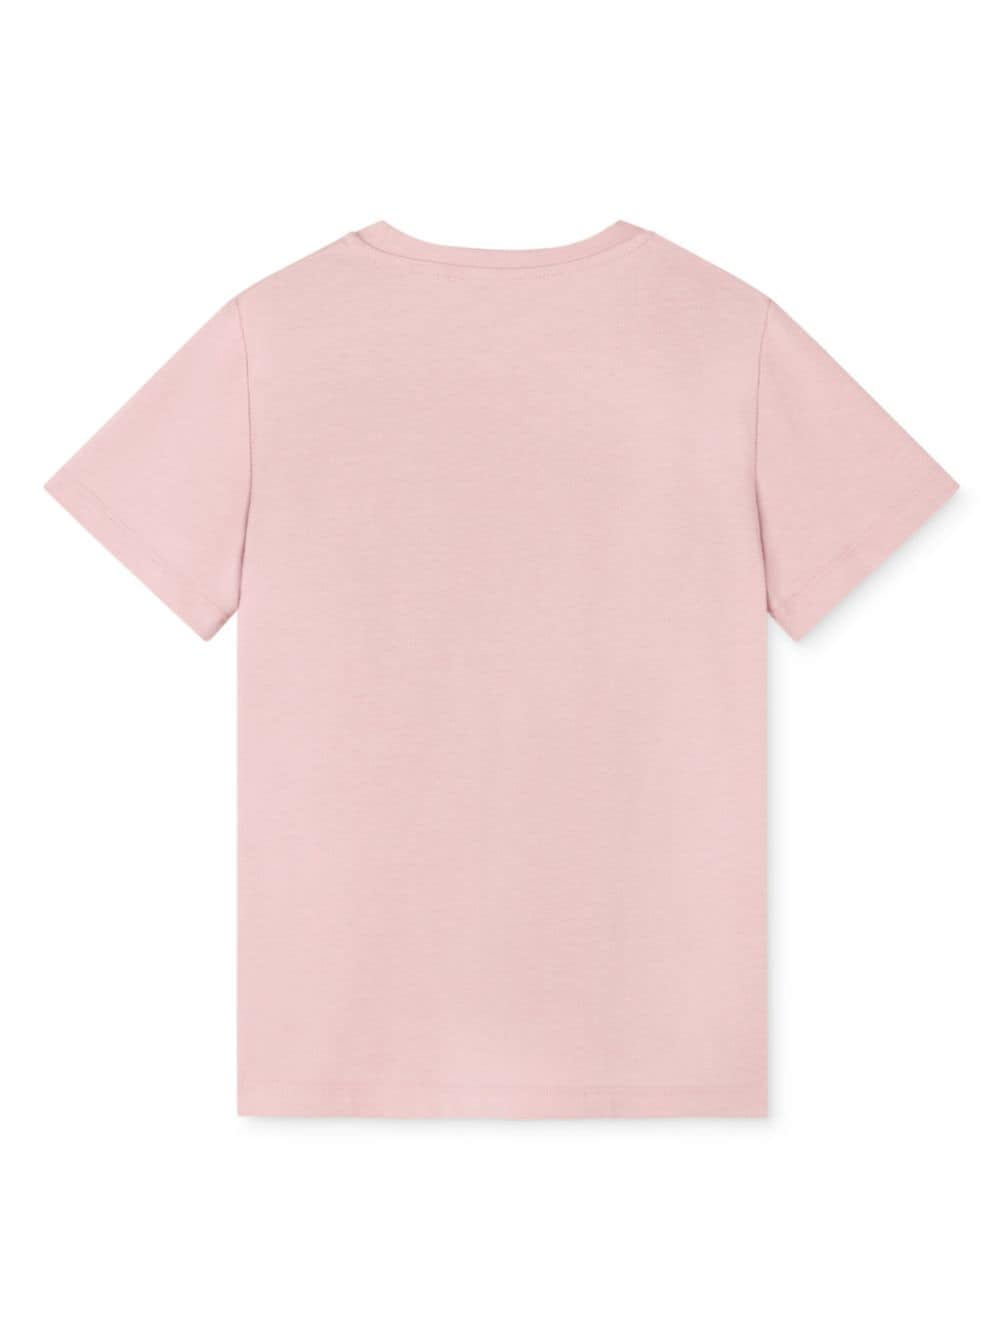 Pink cotton t-shirt for girls